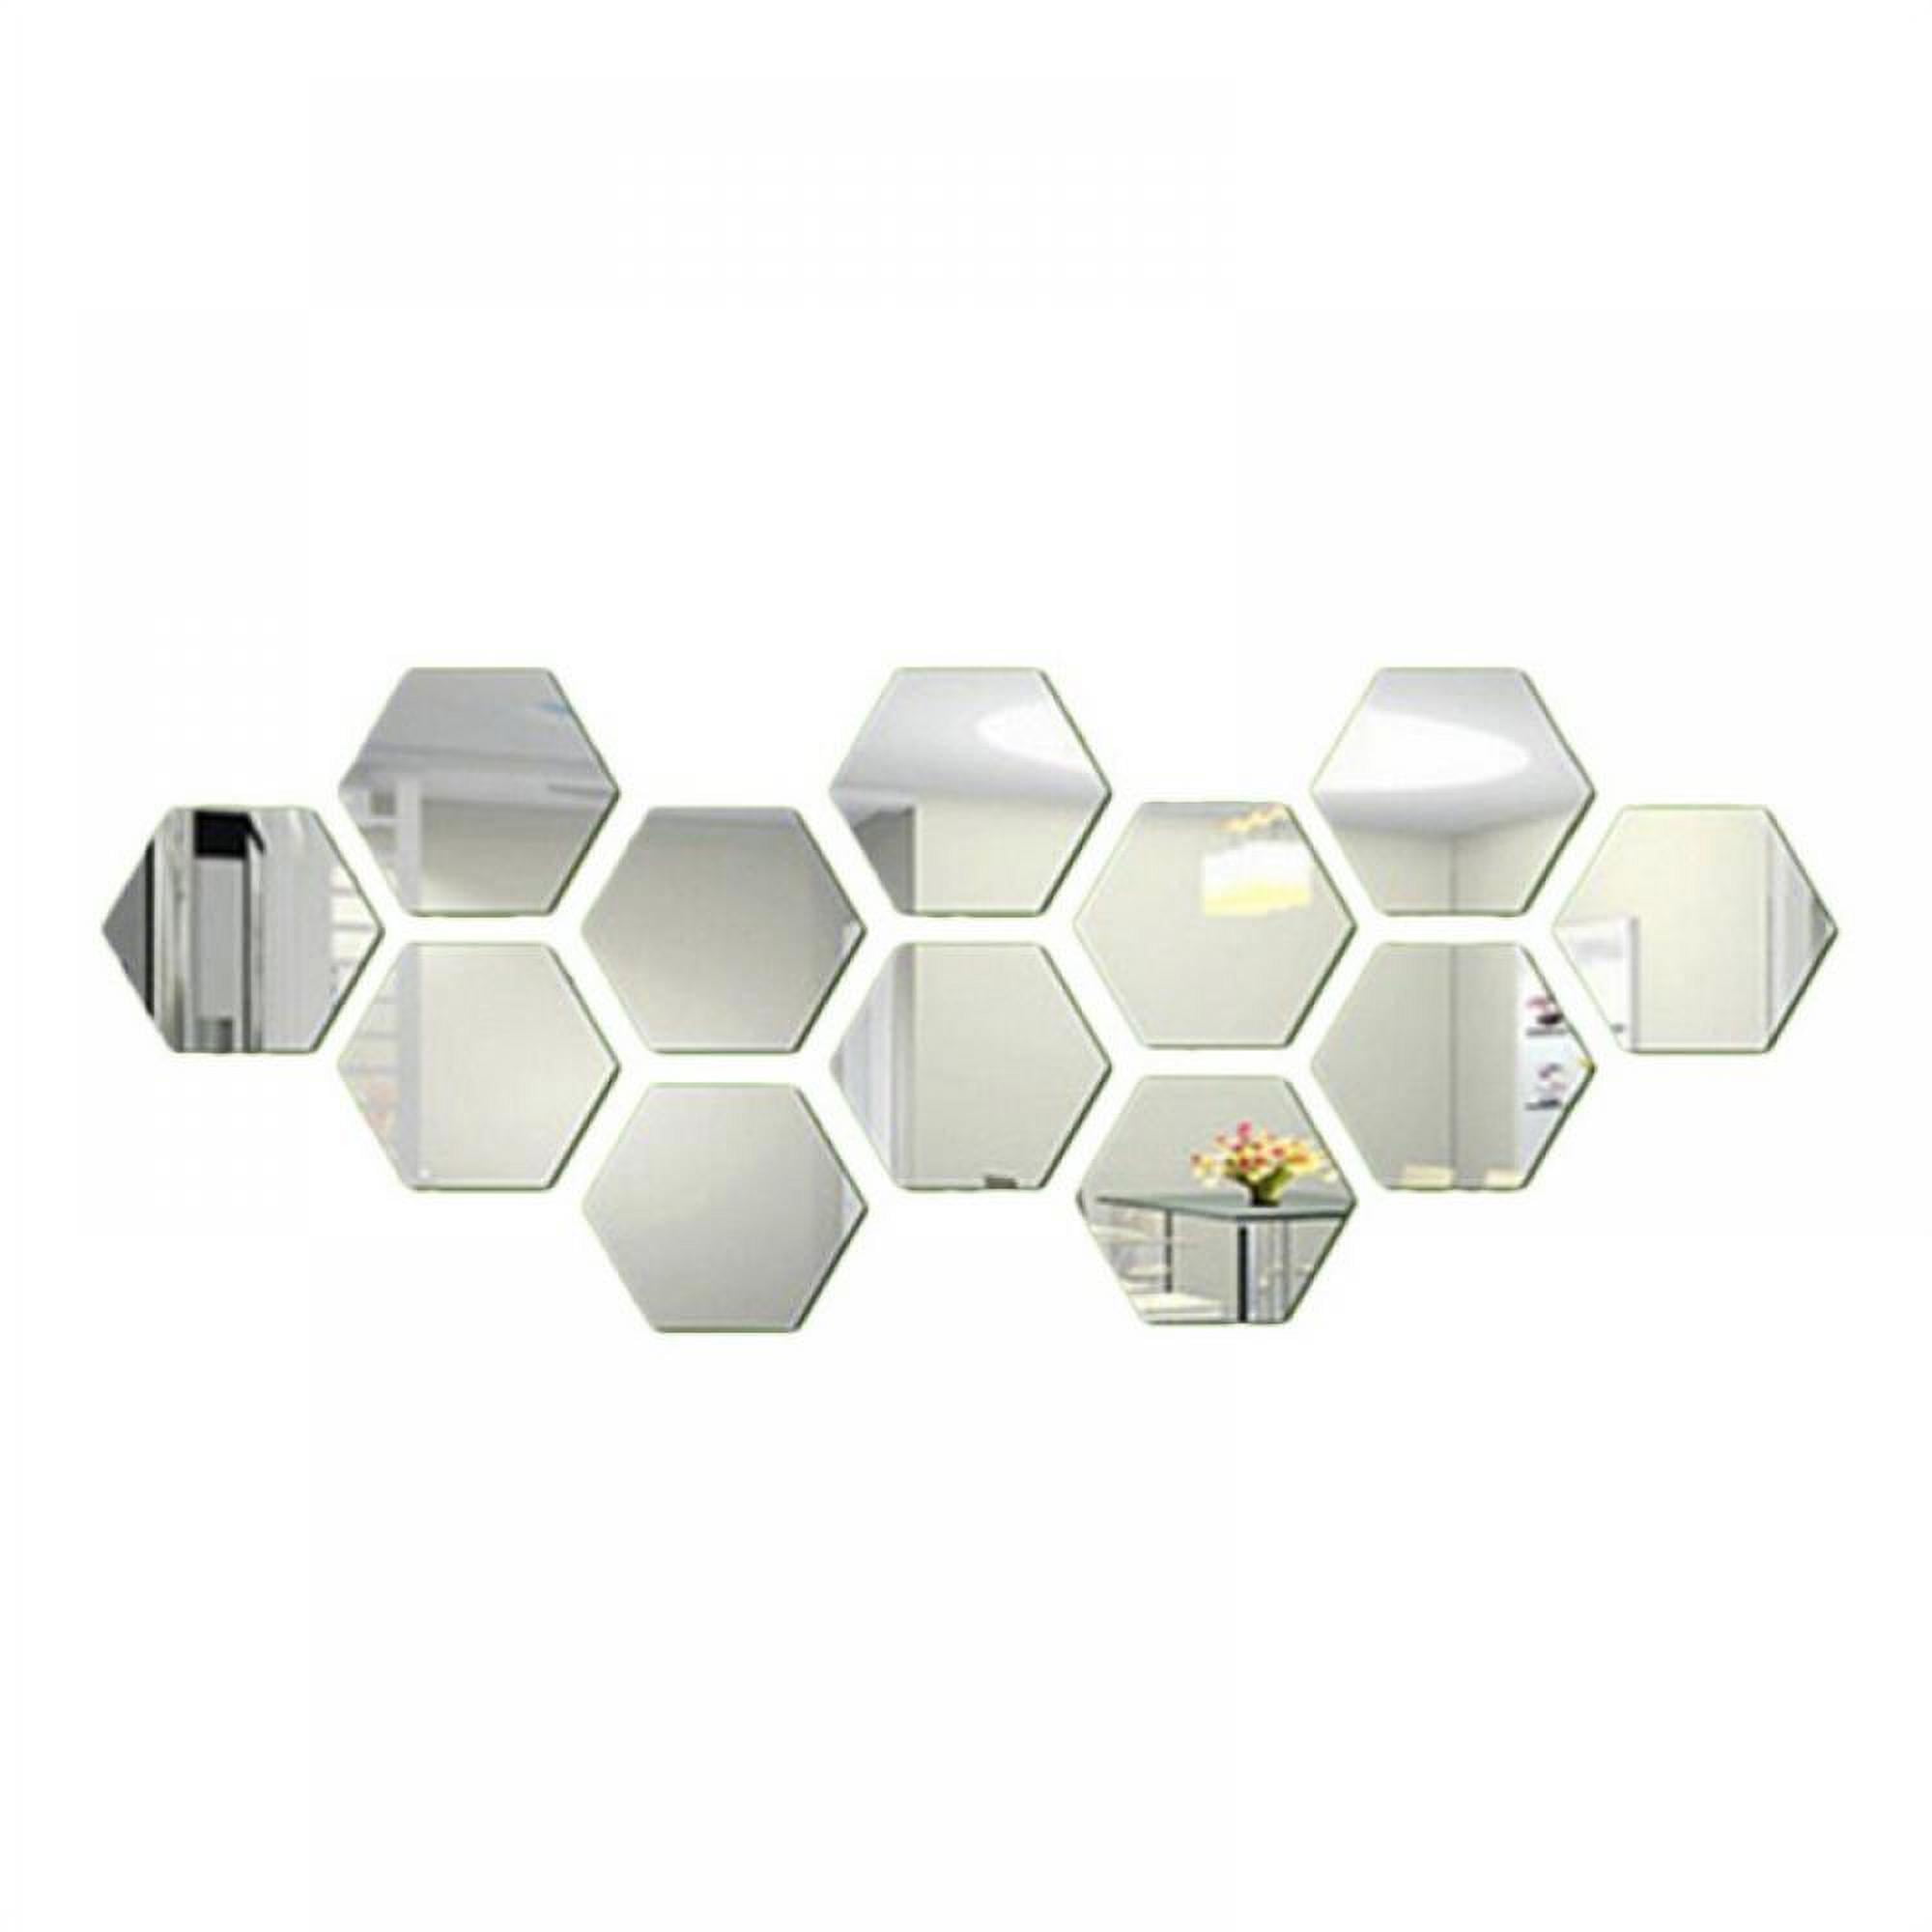 Hexagon Acrylic Mirror DIY Wall Sticker 3D Stereo Home Decor with Adhesive Rainbow Wall Stickers Mirror Tiles Peel and Stick Renter Friendly Wall